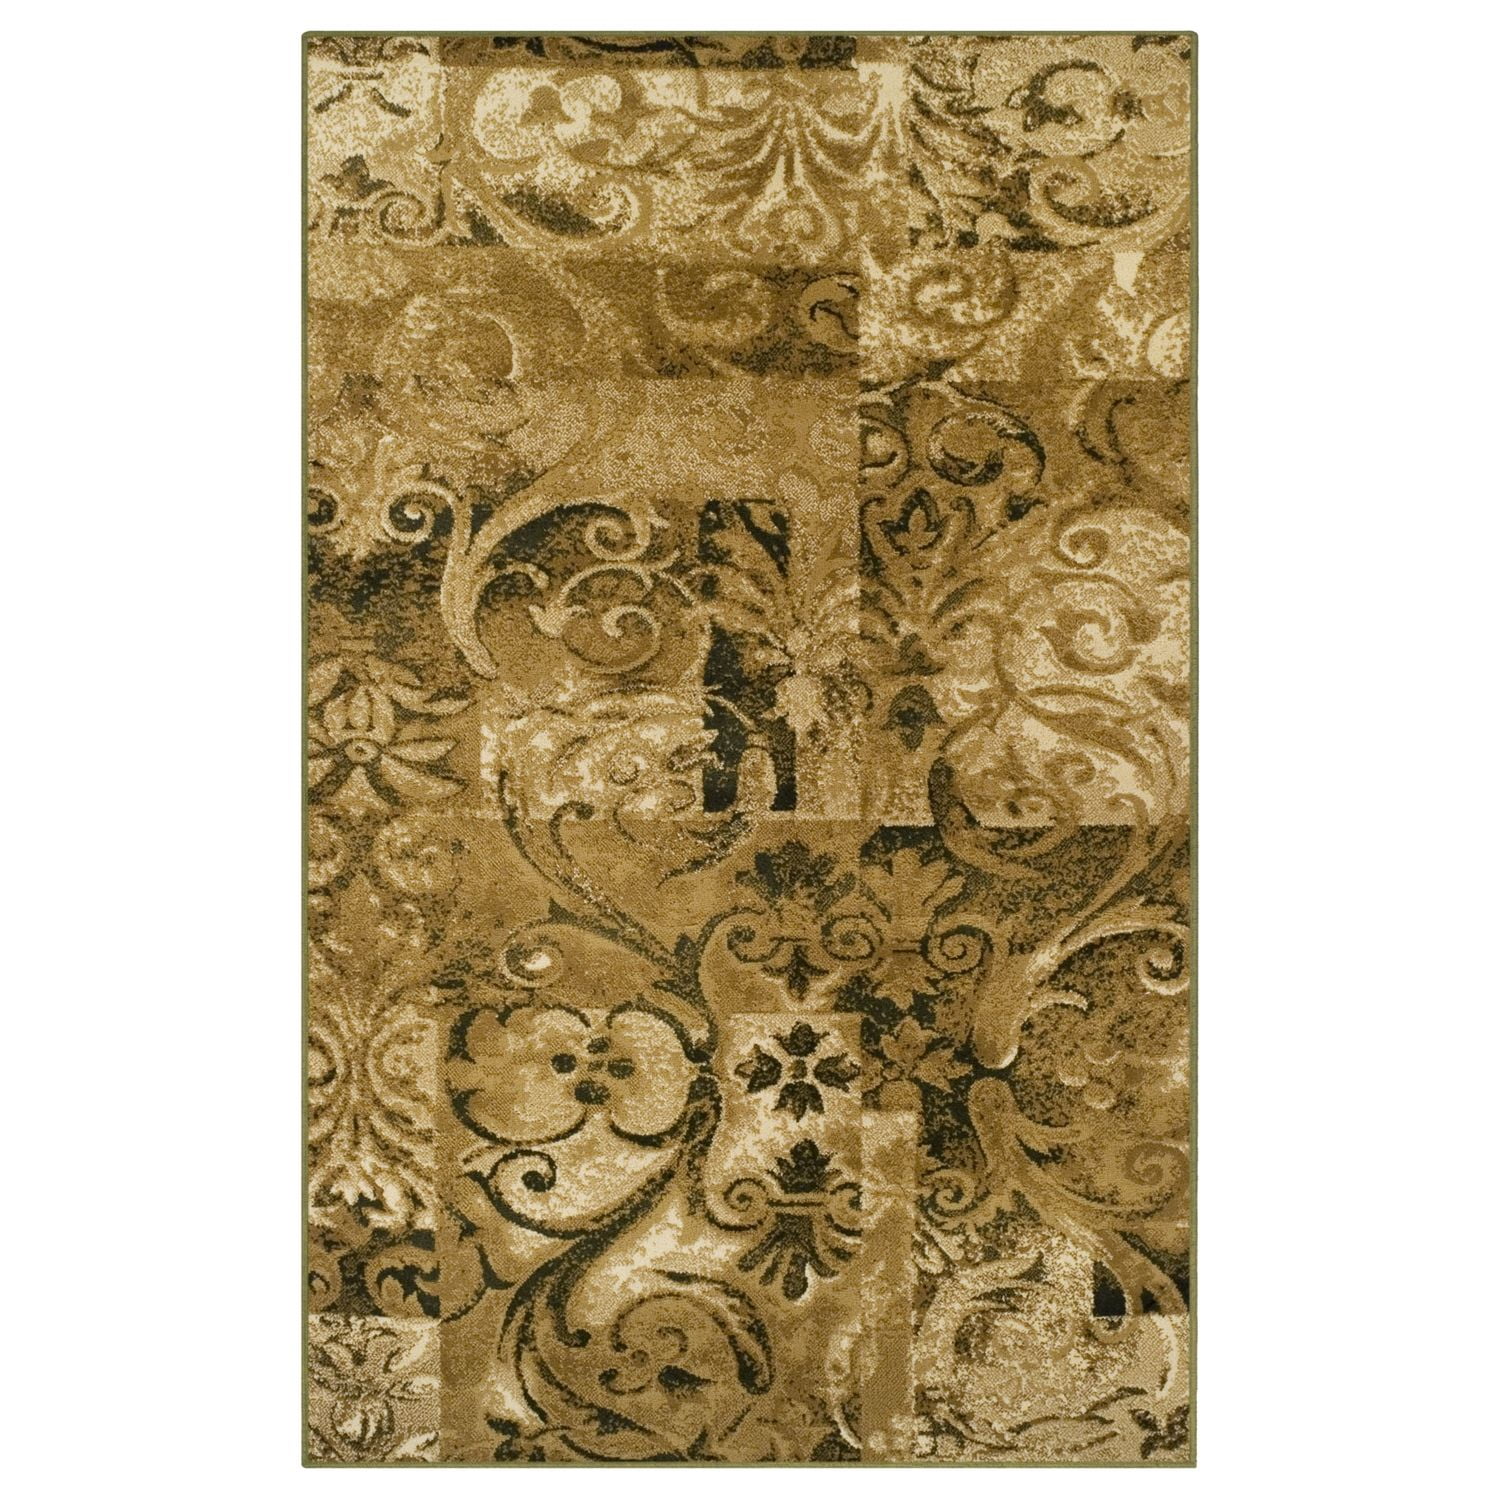 Gold 2 x 3 Rug 10mm Pile with Jute Backing Superior Fleur de Lis Collection Elegant Scrolling Damask Pattern Affordable Contemporary Area Rugs